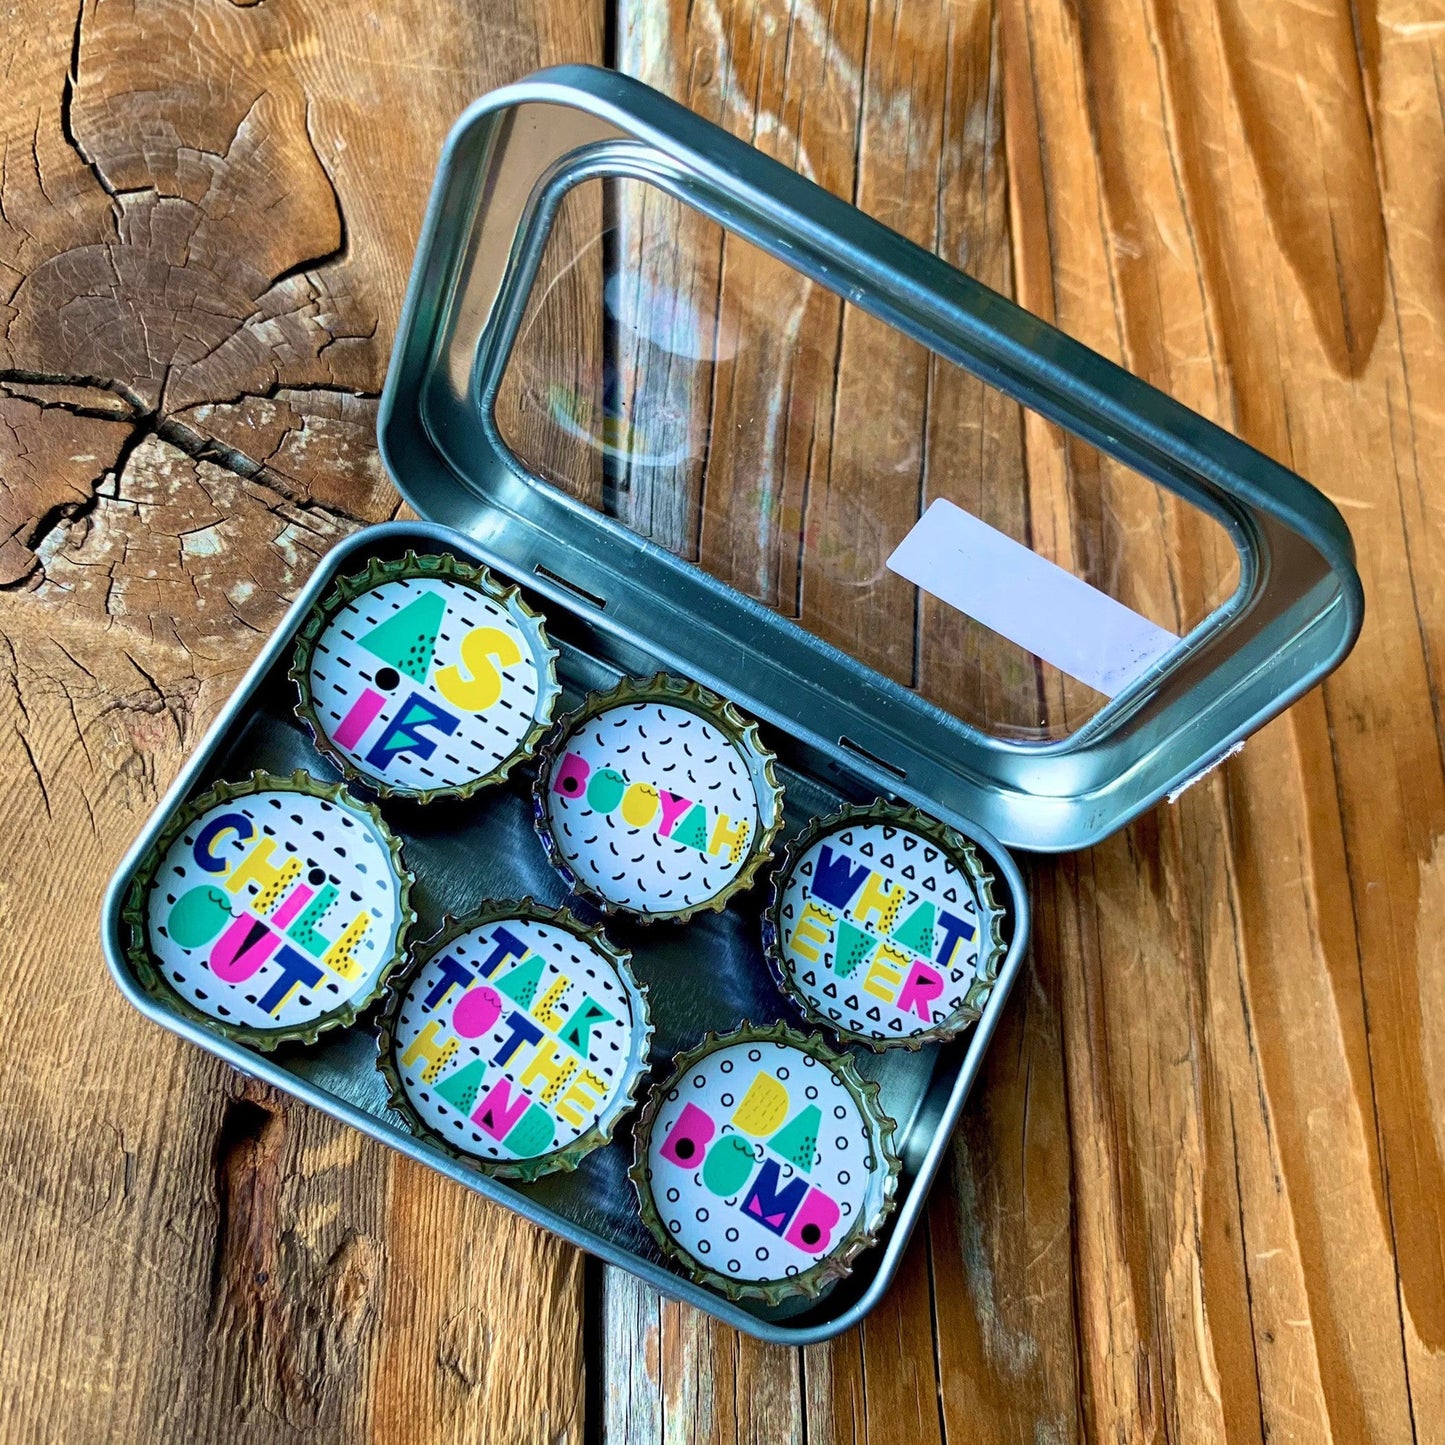 90's Magnet 6 Pack l Round Bottle-Cap Style Magnet Set in a Gift Tin